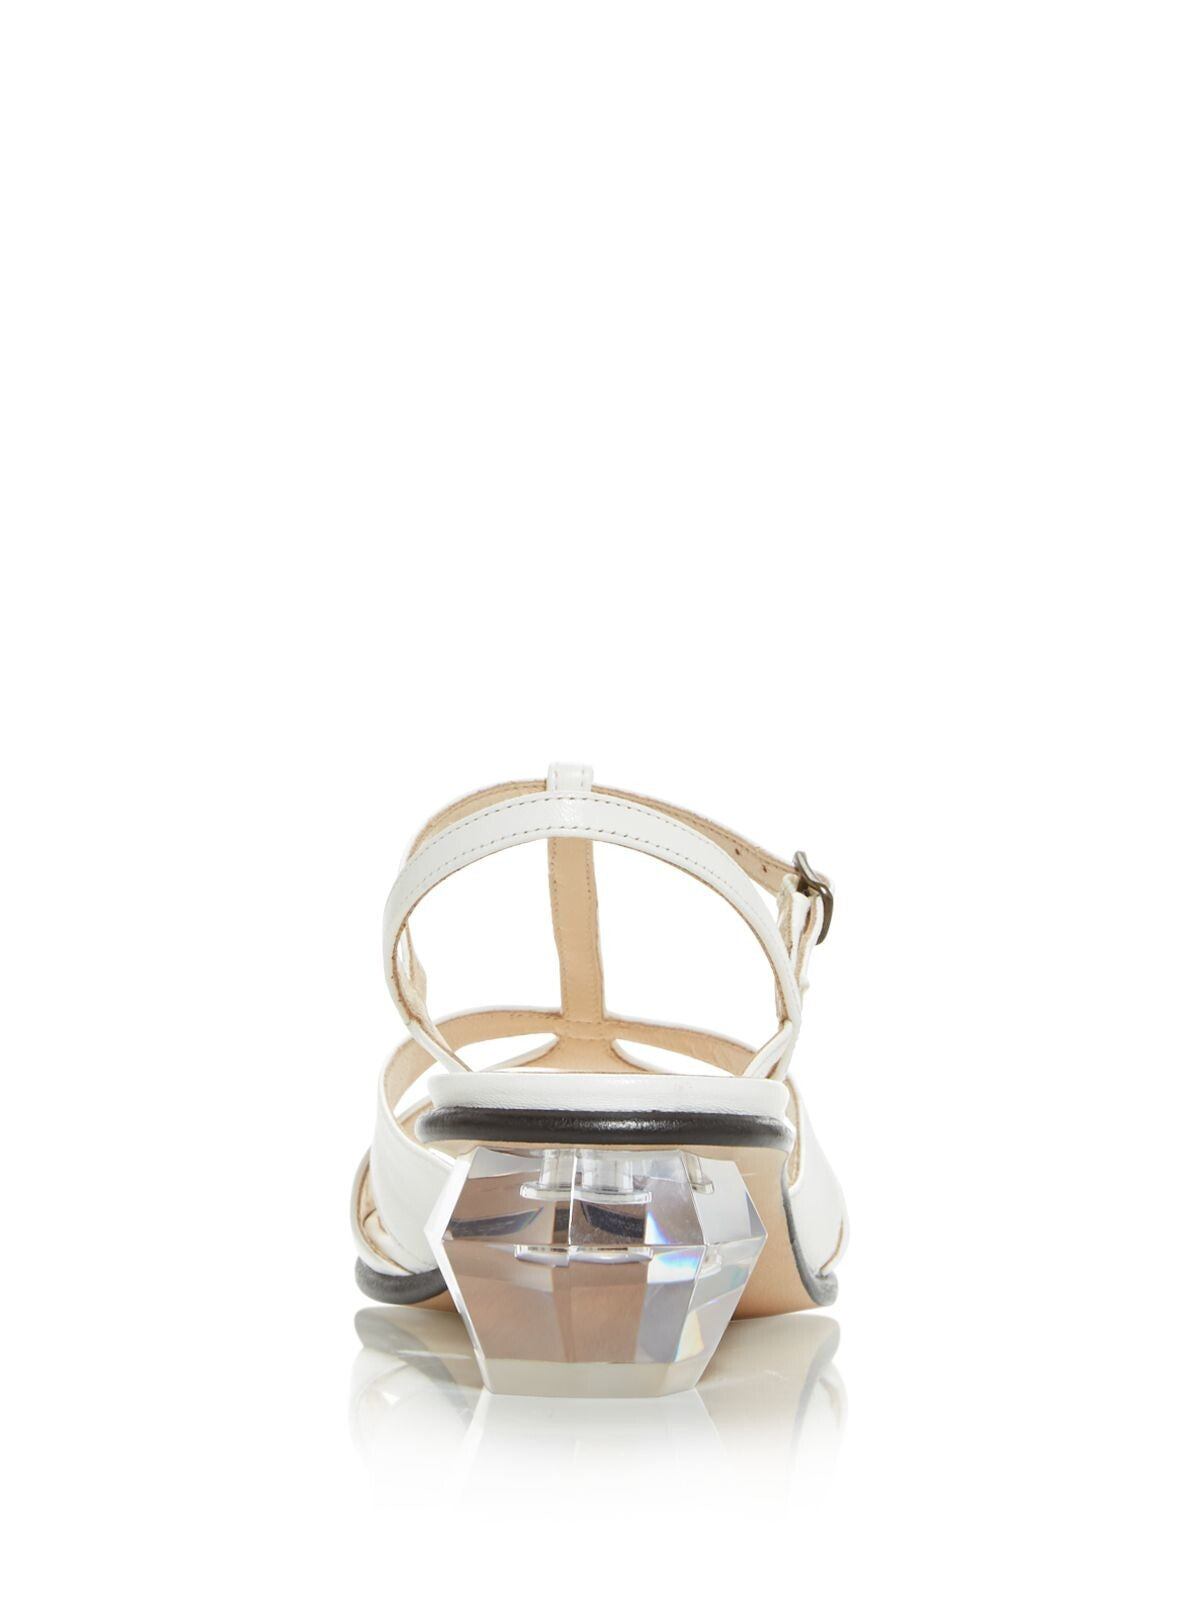 MARC JACOBS Womens White Adjustable Padded T-Strap Strappy The Gem Square Toe Sculpted Heel Buckle Leather Dress Slingback Sandal 38.5